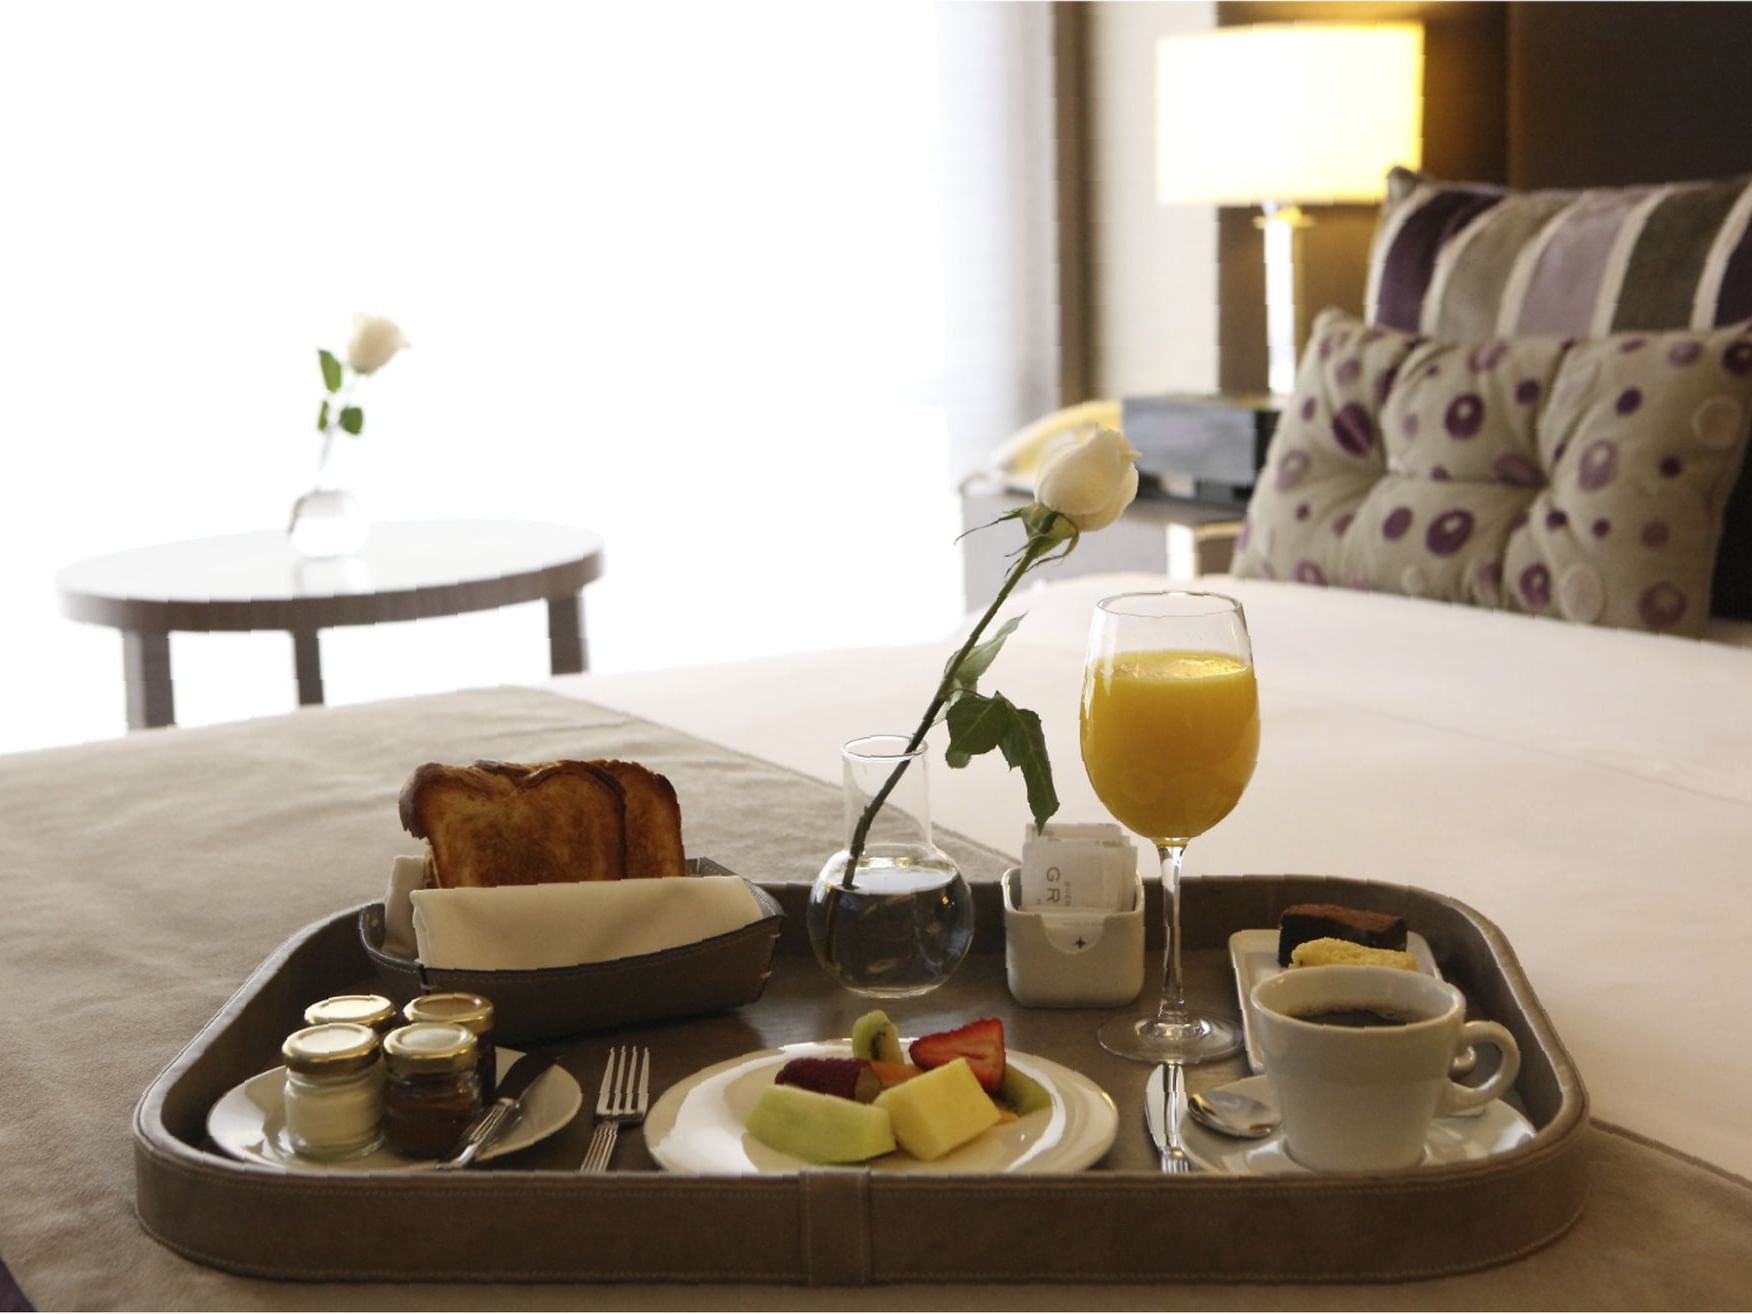 Breakfast tray served on the bed at Grand Hotels Lux